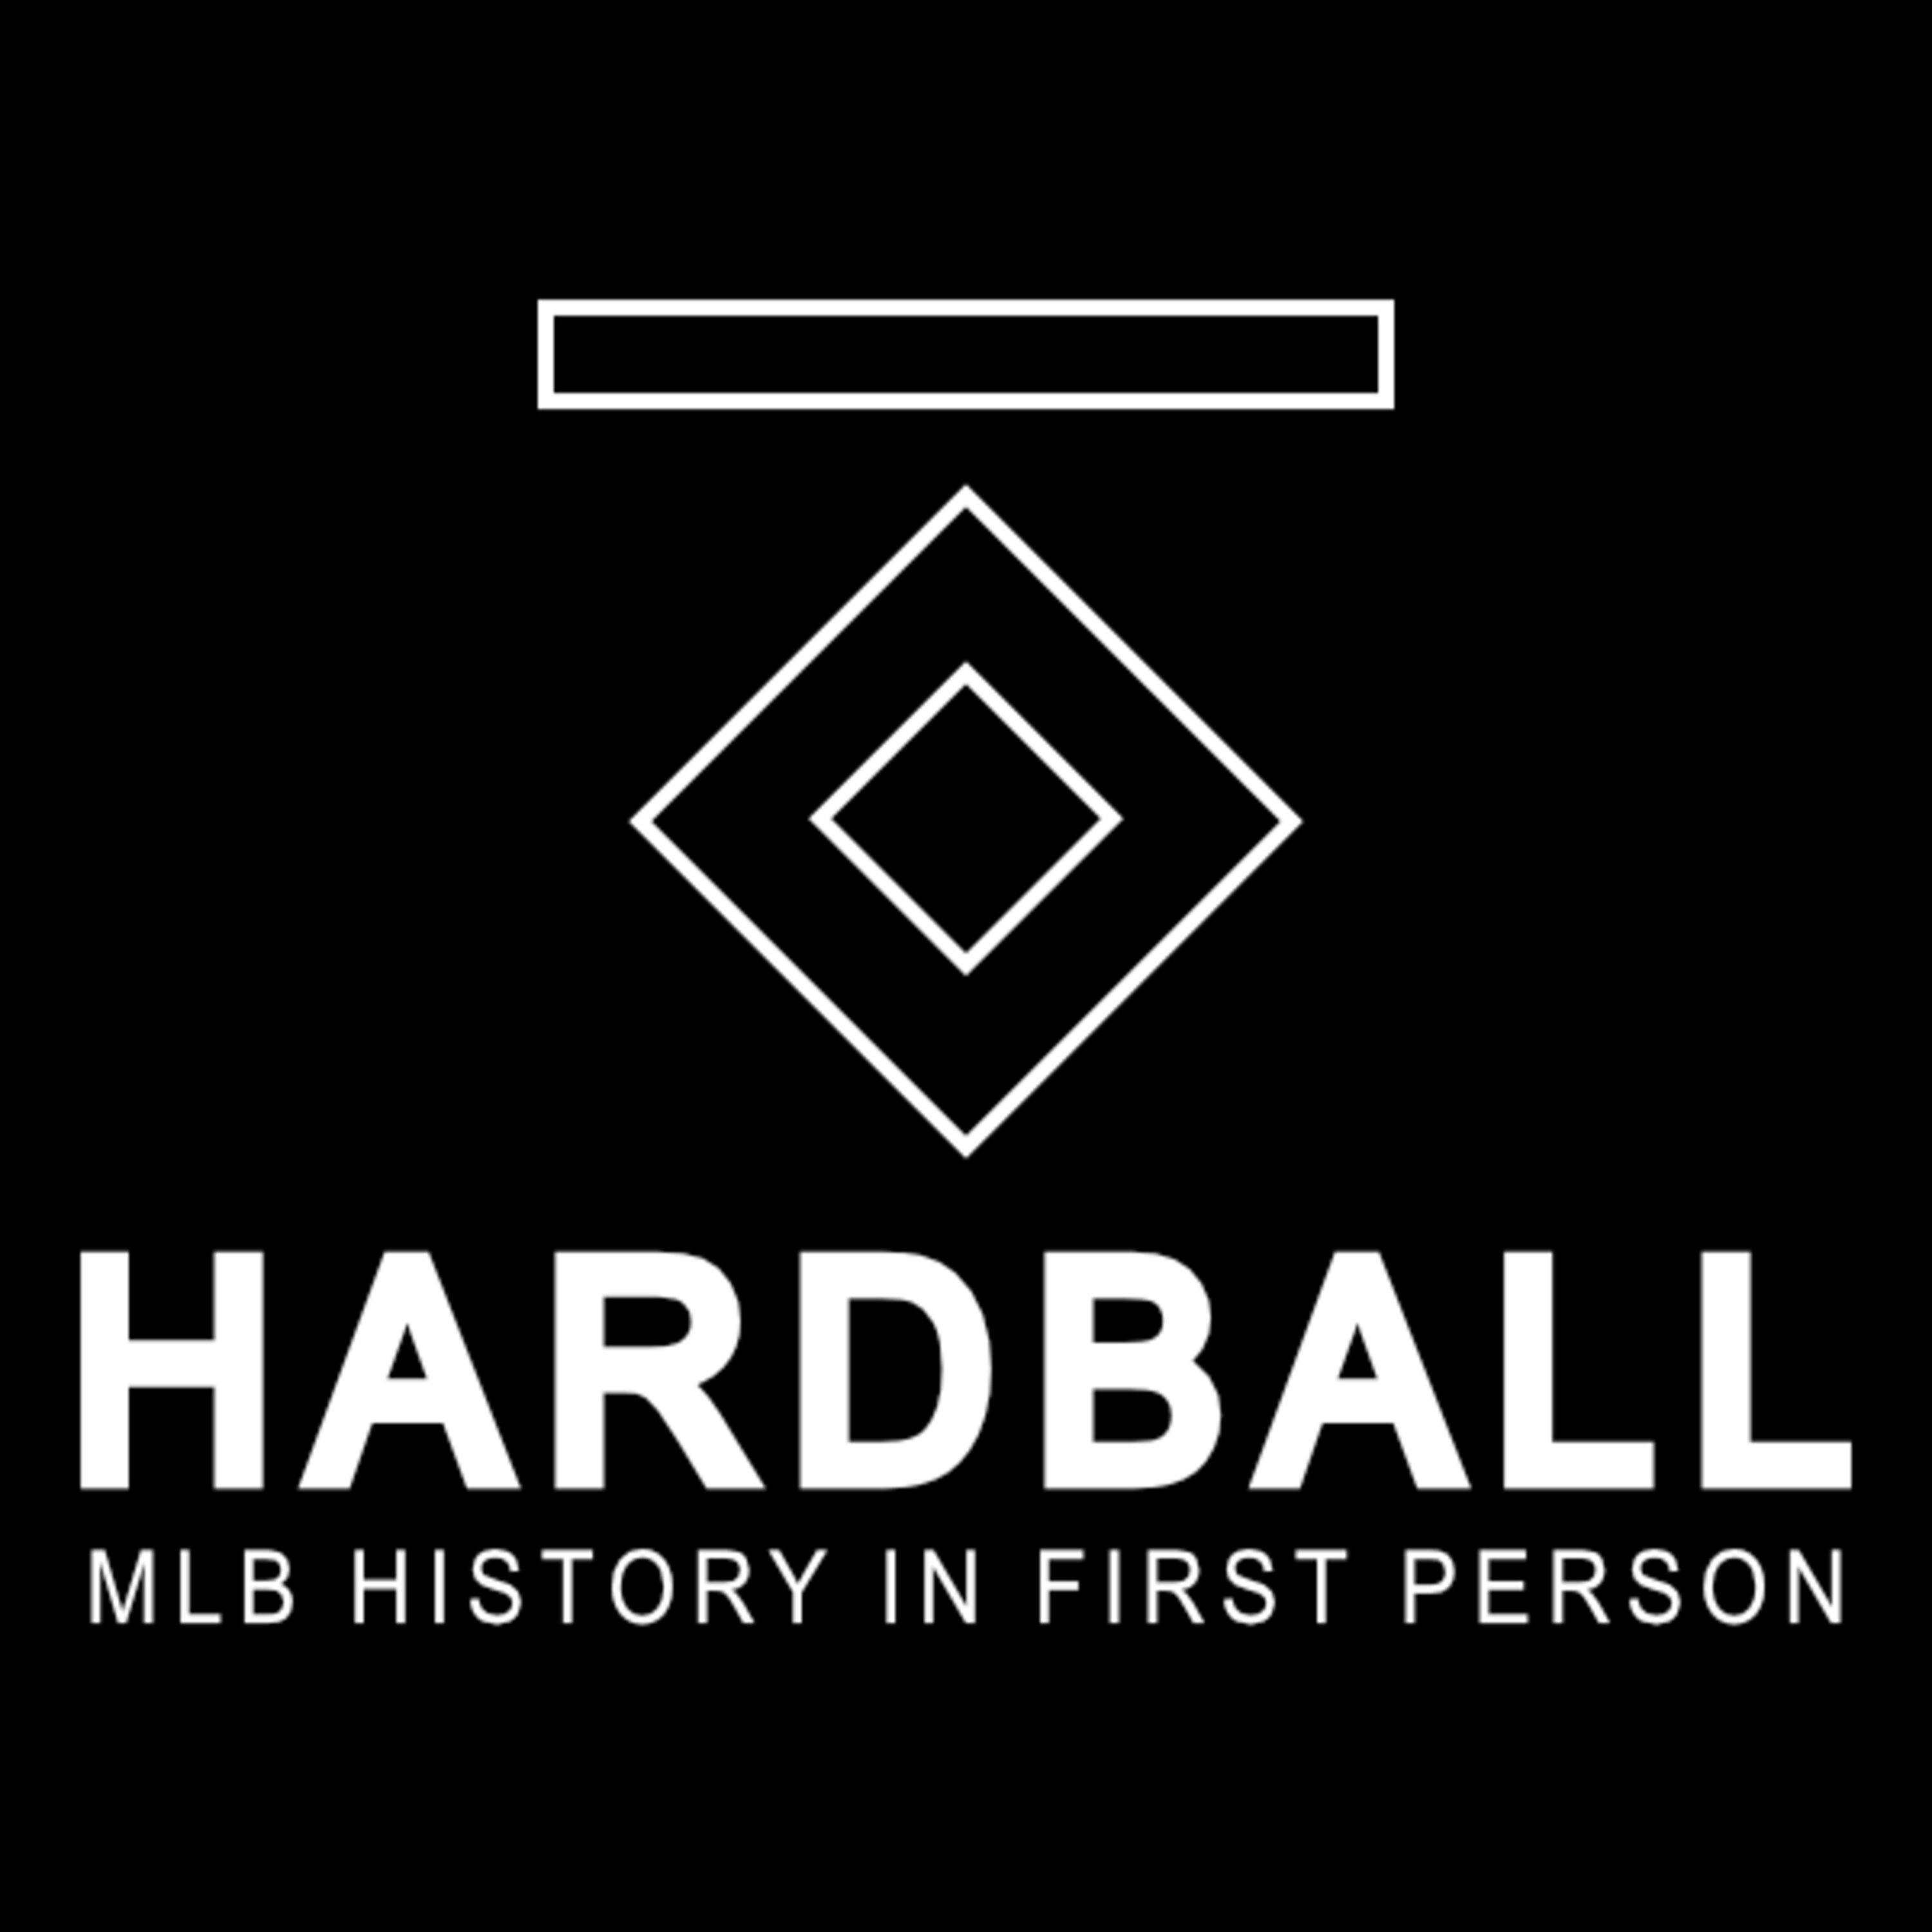 Hardball: MLB History In First Person